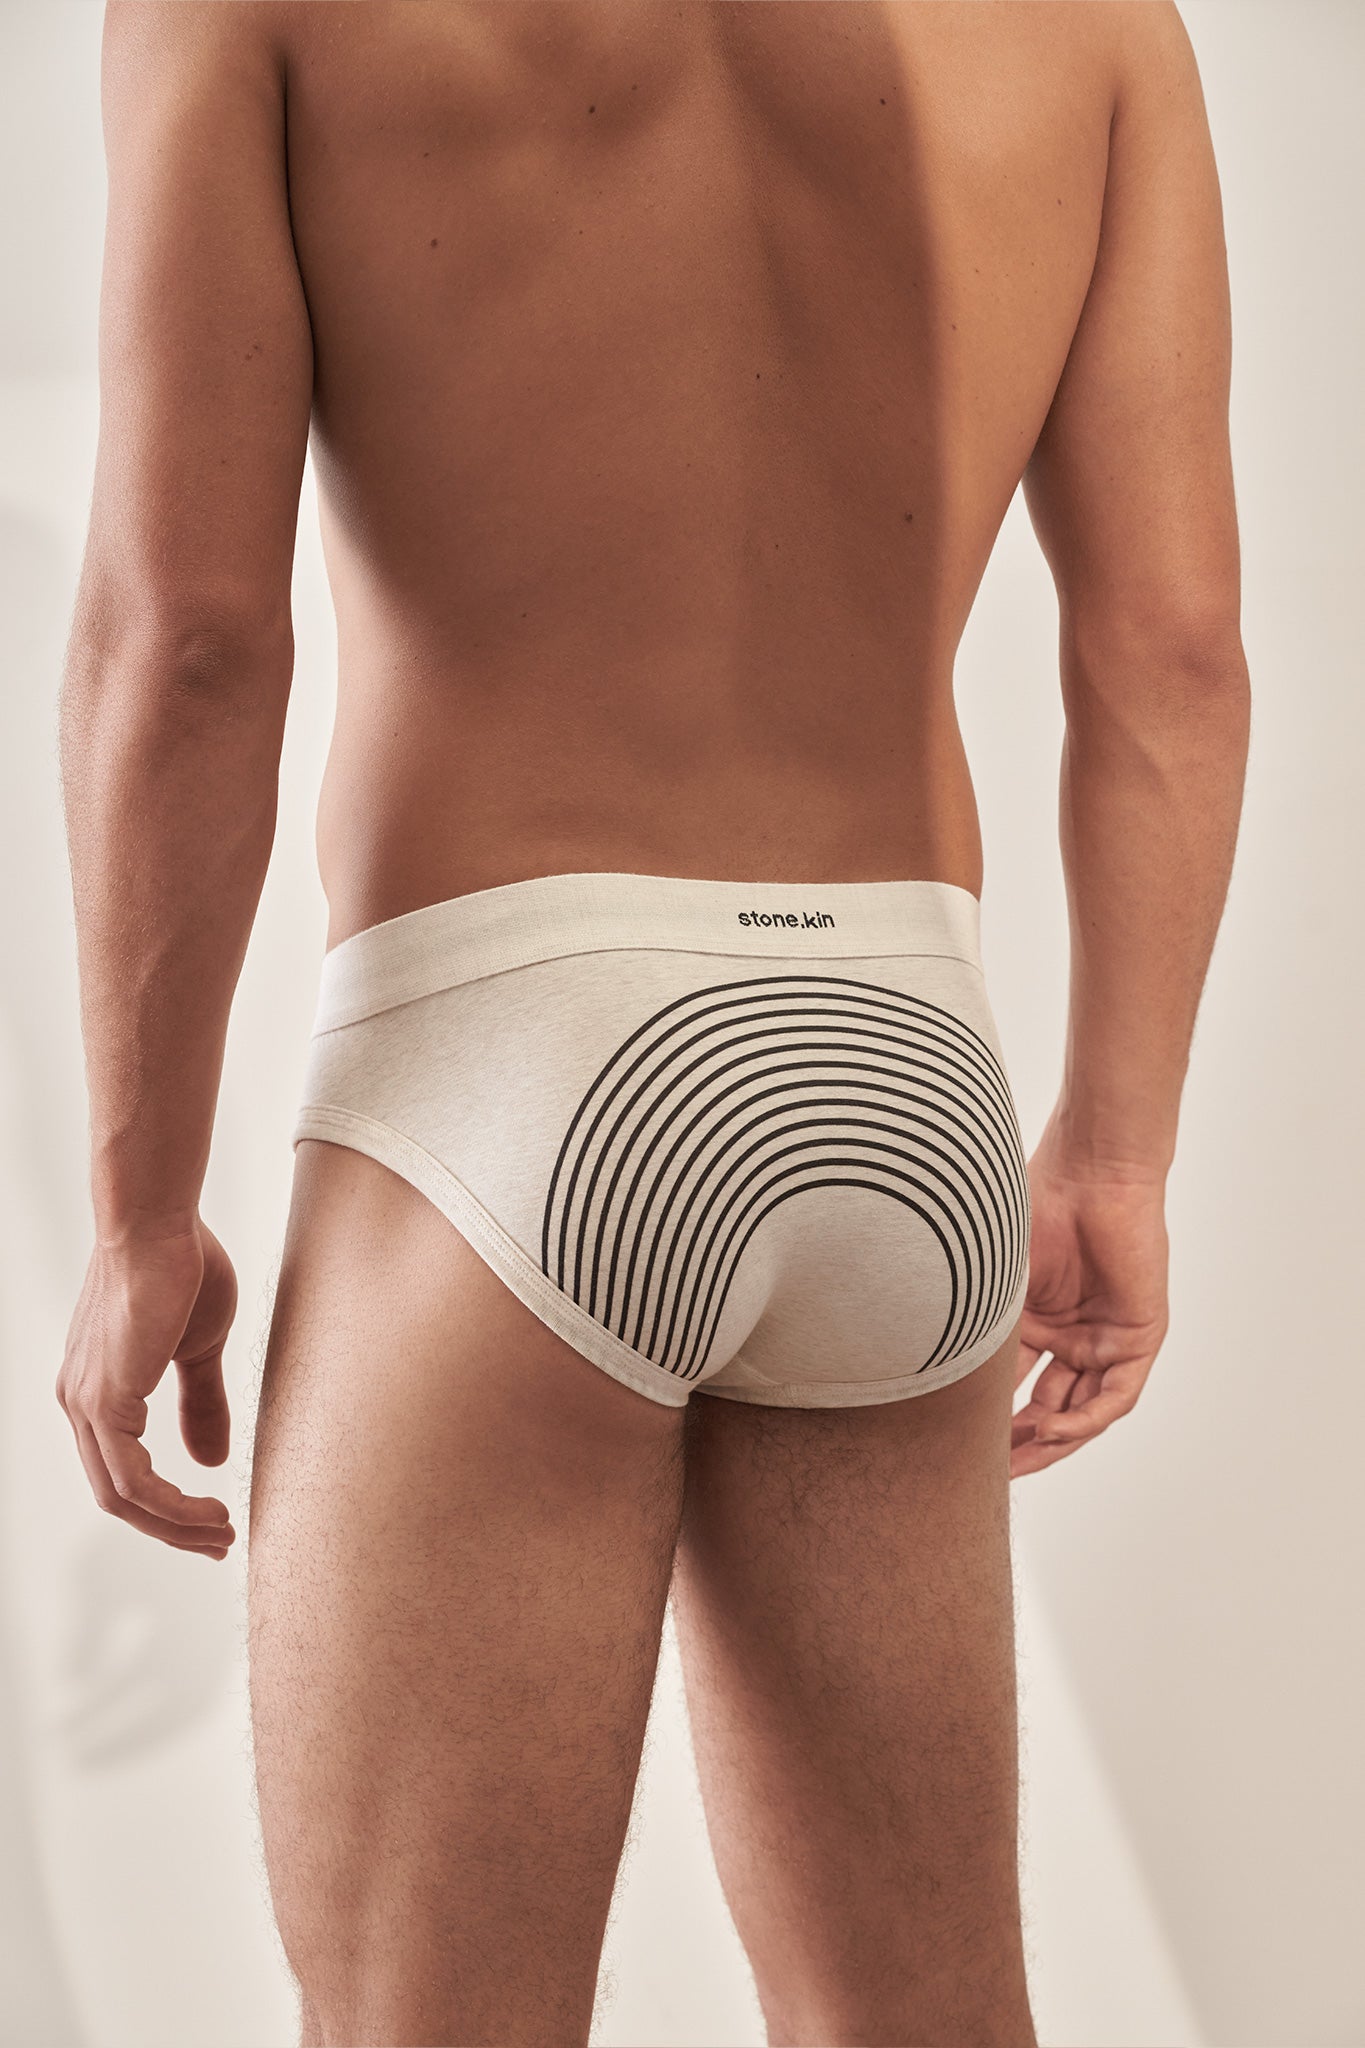 Stone.kin - Brief in Organic Cotton - Bone with Lines